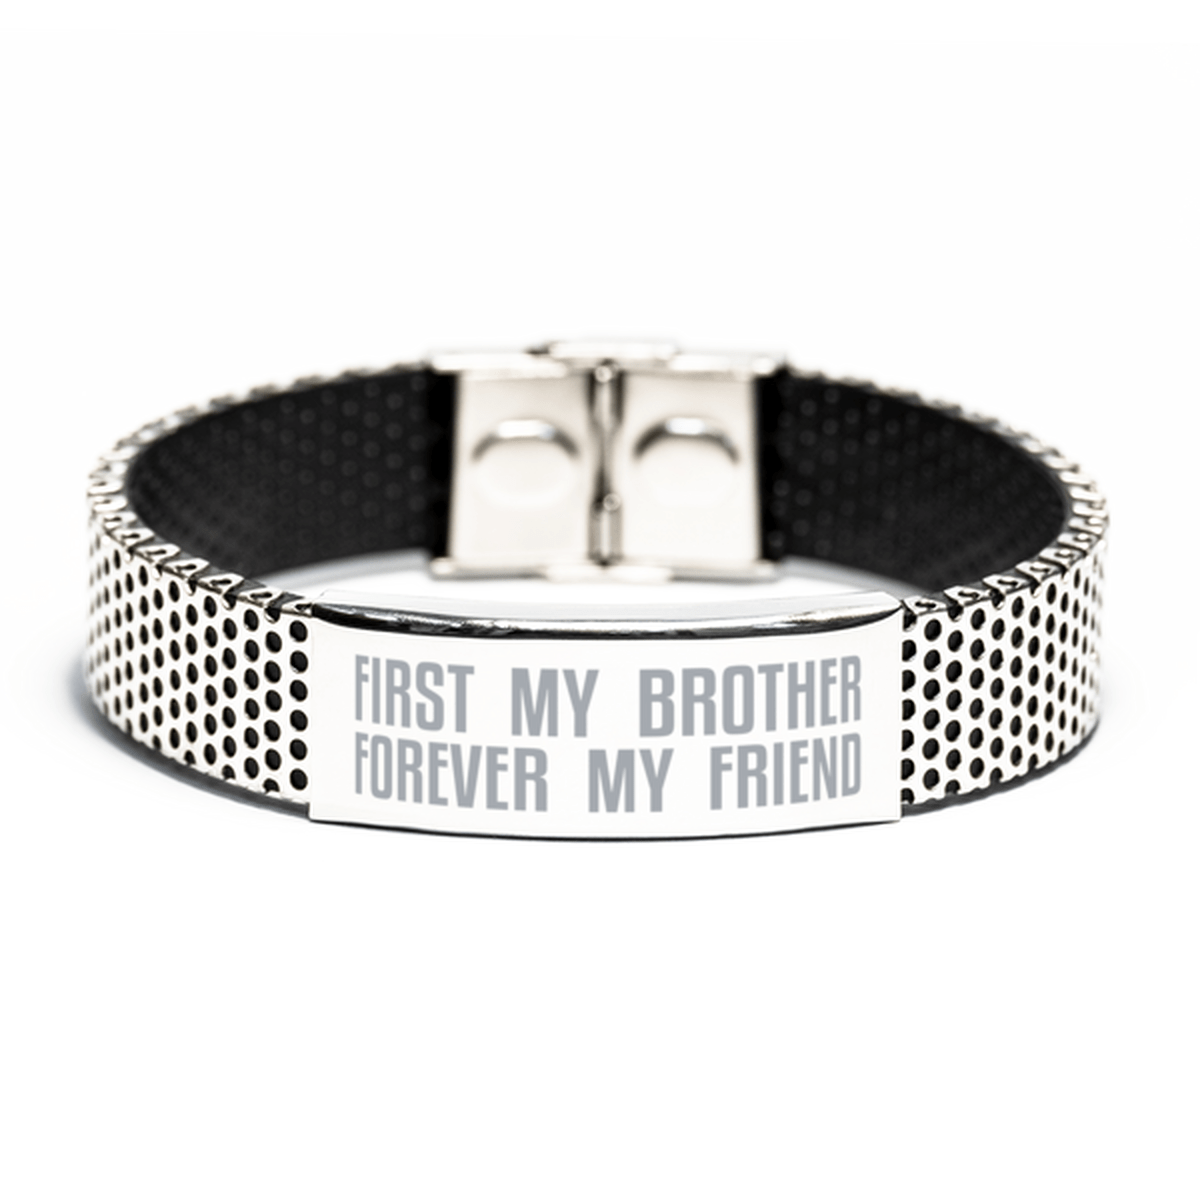 Unique Brother Stainless Steel Bracelet, First My Brother Forever My Friend, Best Gift for Brother Birthday, Christmas